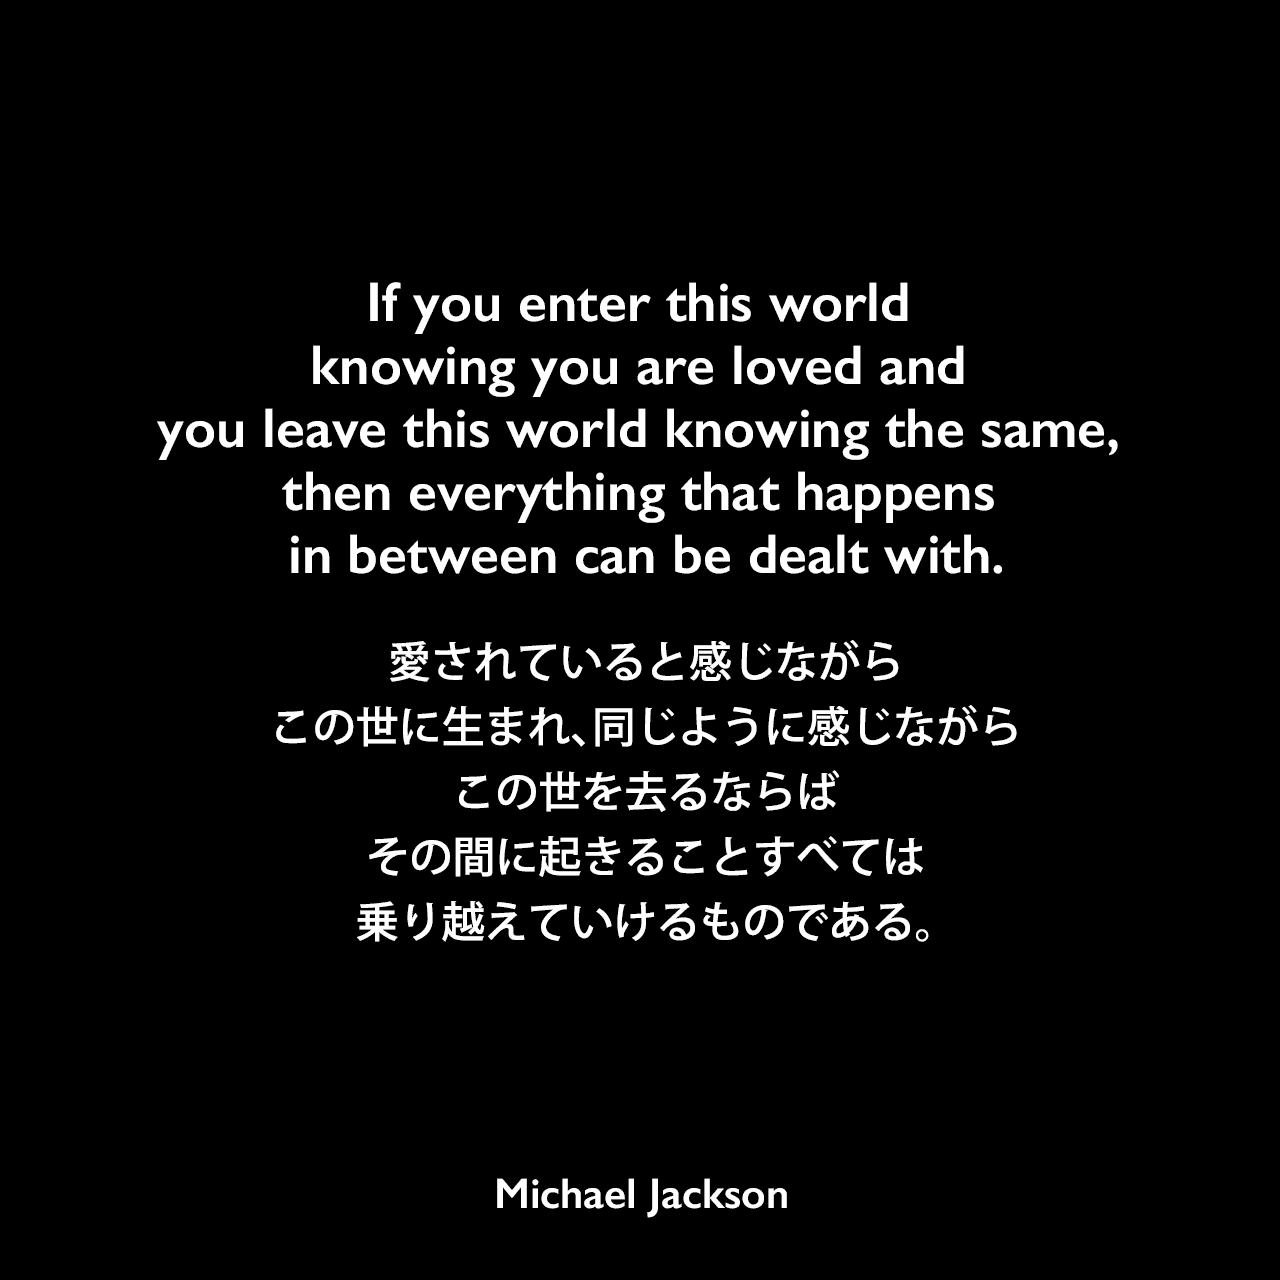 If you enter this world knowing you are loved and you leave this world knowing the same, then everything that happens in between can be dealt with.愛されていると感じながらこの世に生まれ、同じように感じながらこの世を去るならば、その間に起きることすべては乗り越えていけるものである。Michael Jackson